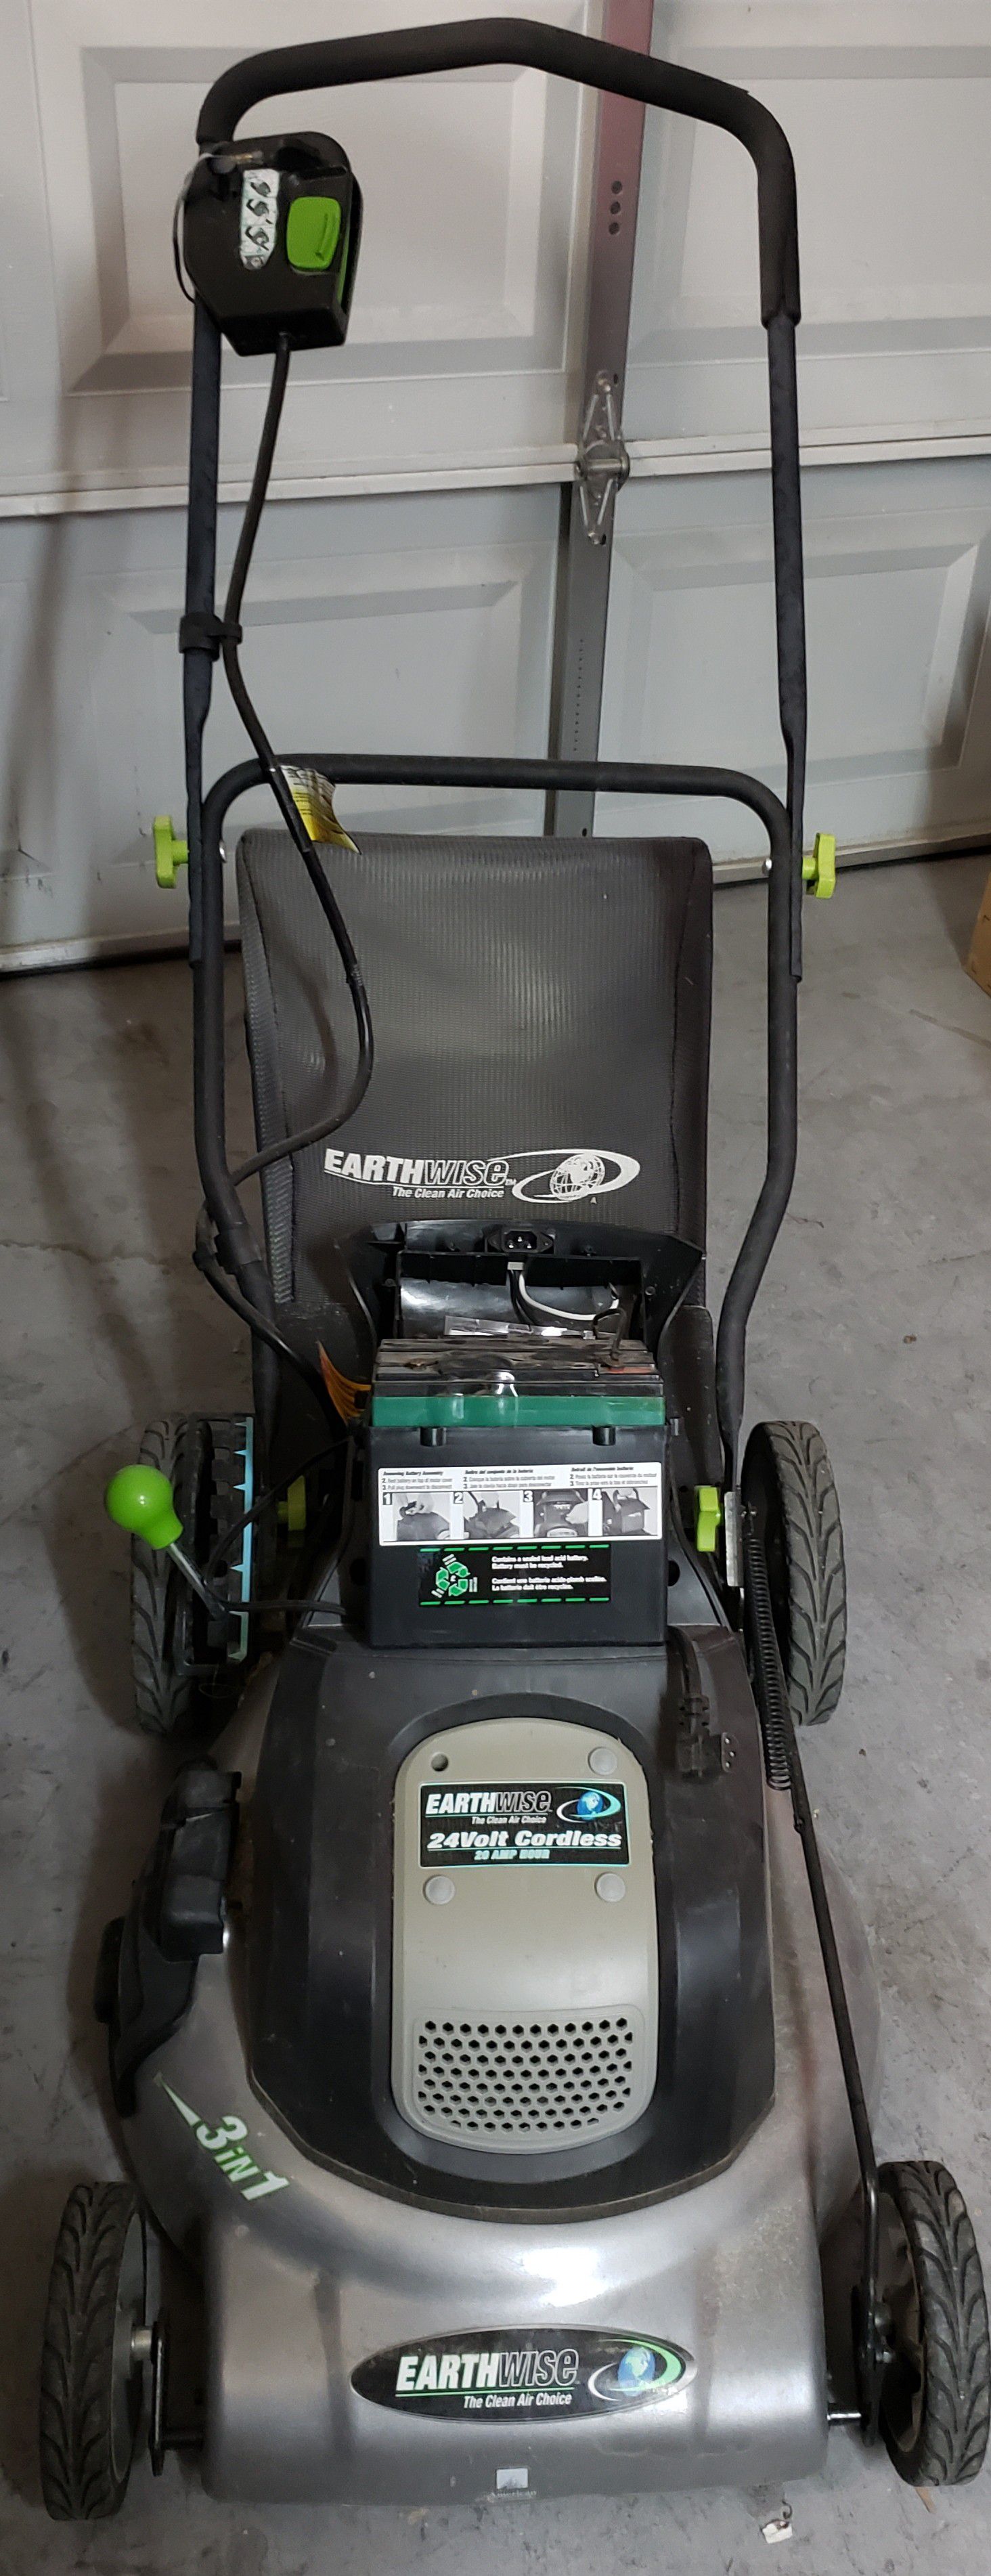 Earth wise electric lawn mower